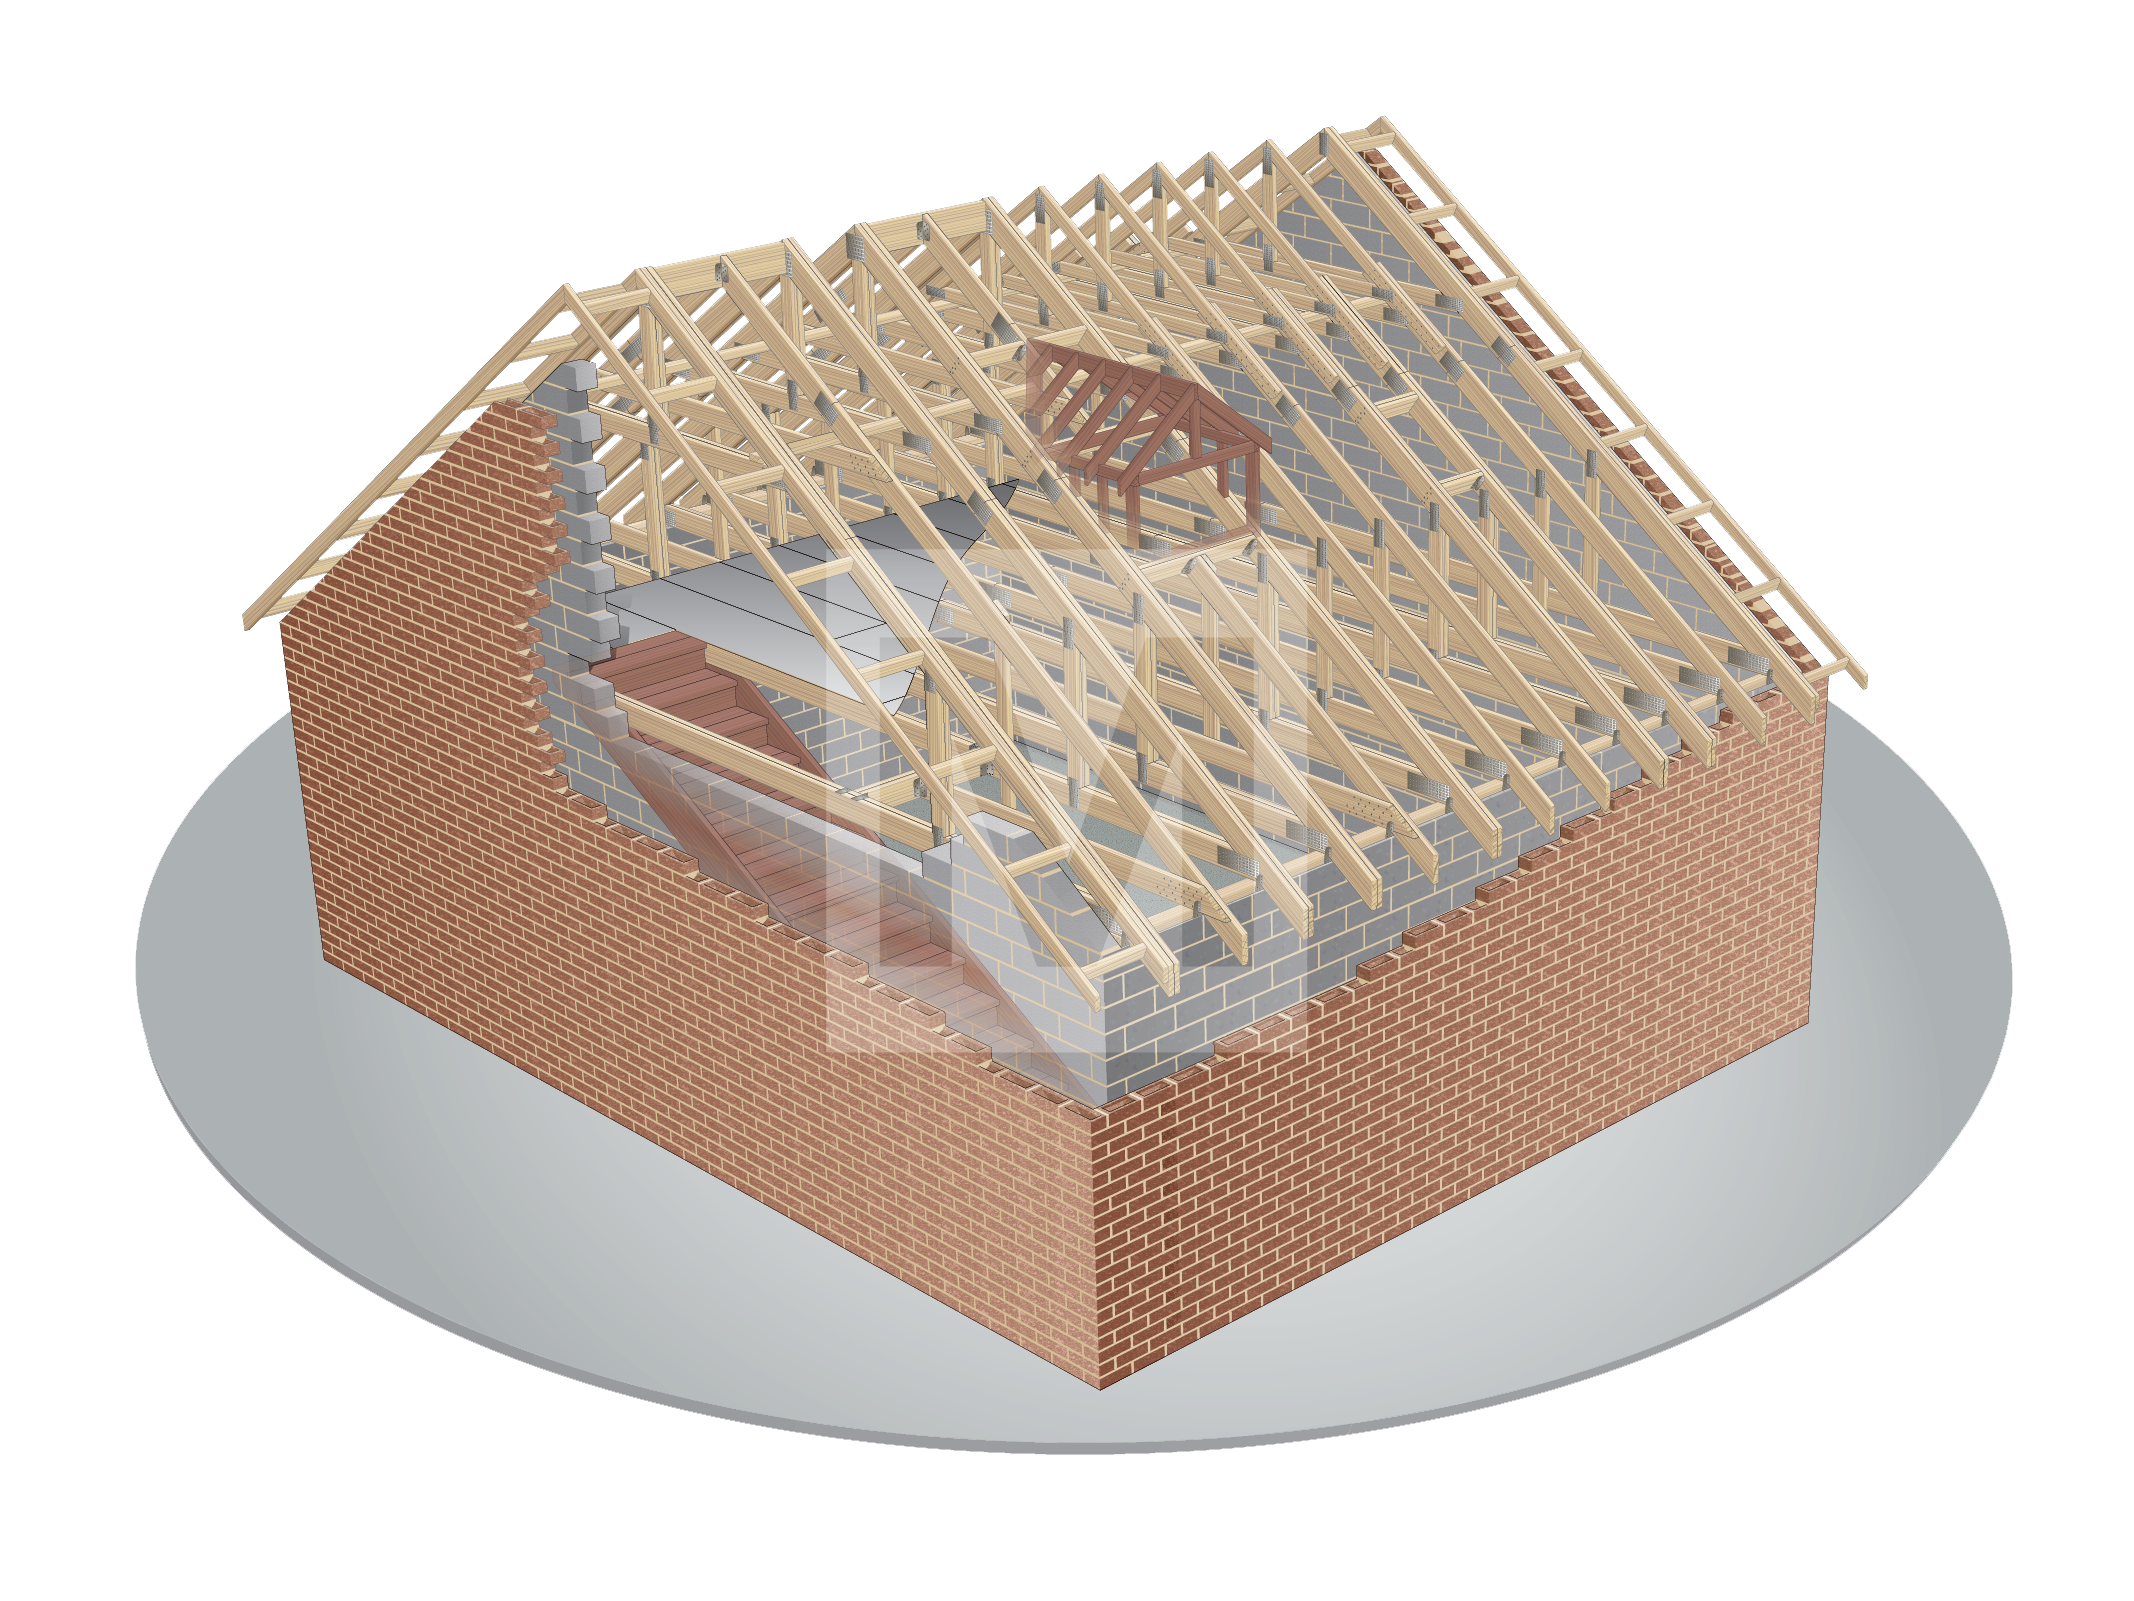 Roof trusses experts Merronbrook use the most advanced CAD software to create transparent images like this of their attic trusses, as well as floor joists and timber frame construction